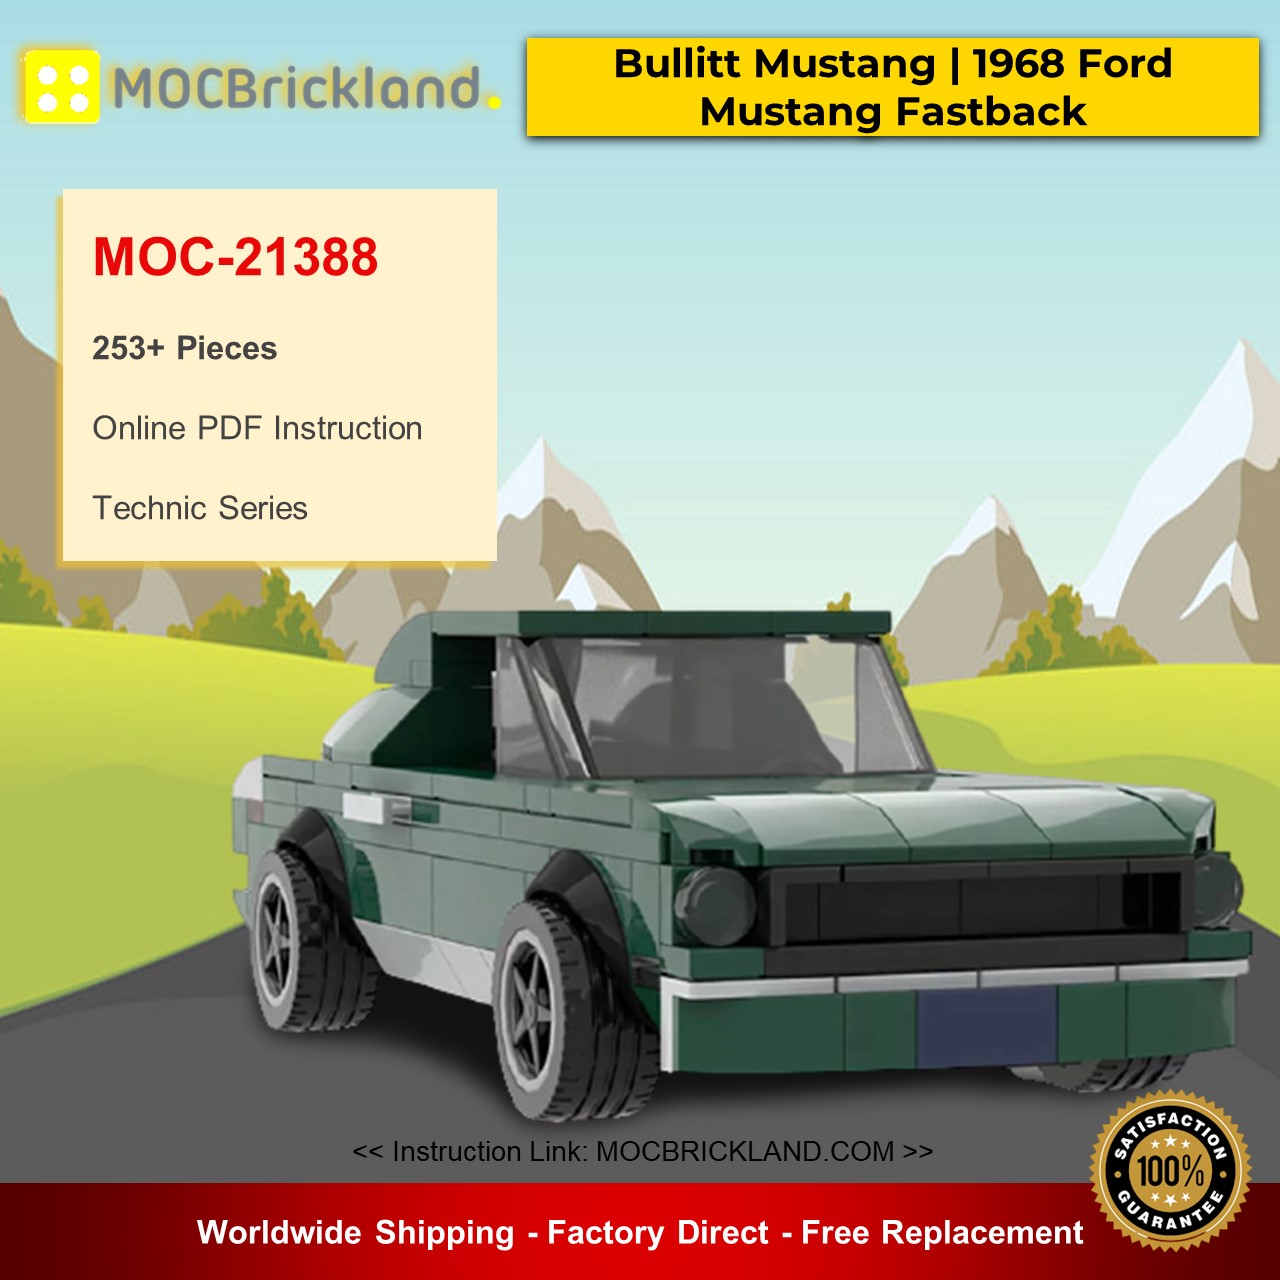 MOC-21388 Bullitt Mustang | 1968 Ford Mustang Fastback Technic Designed By mkibs With 253 Pieces